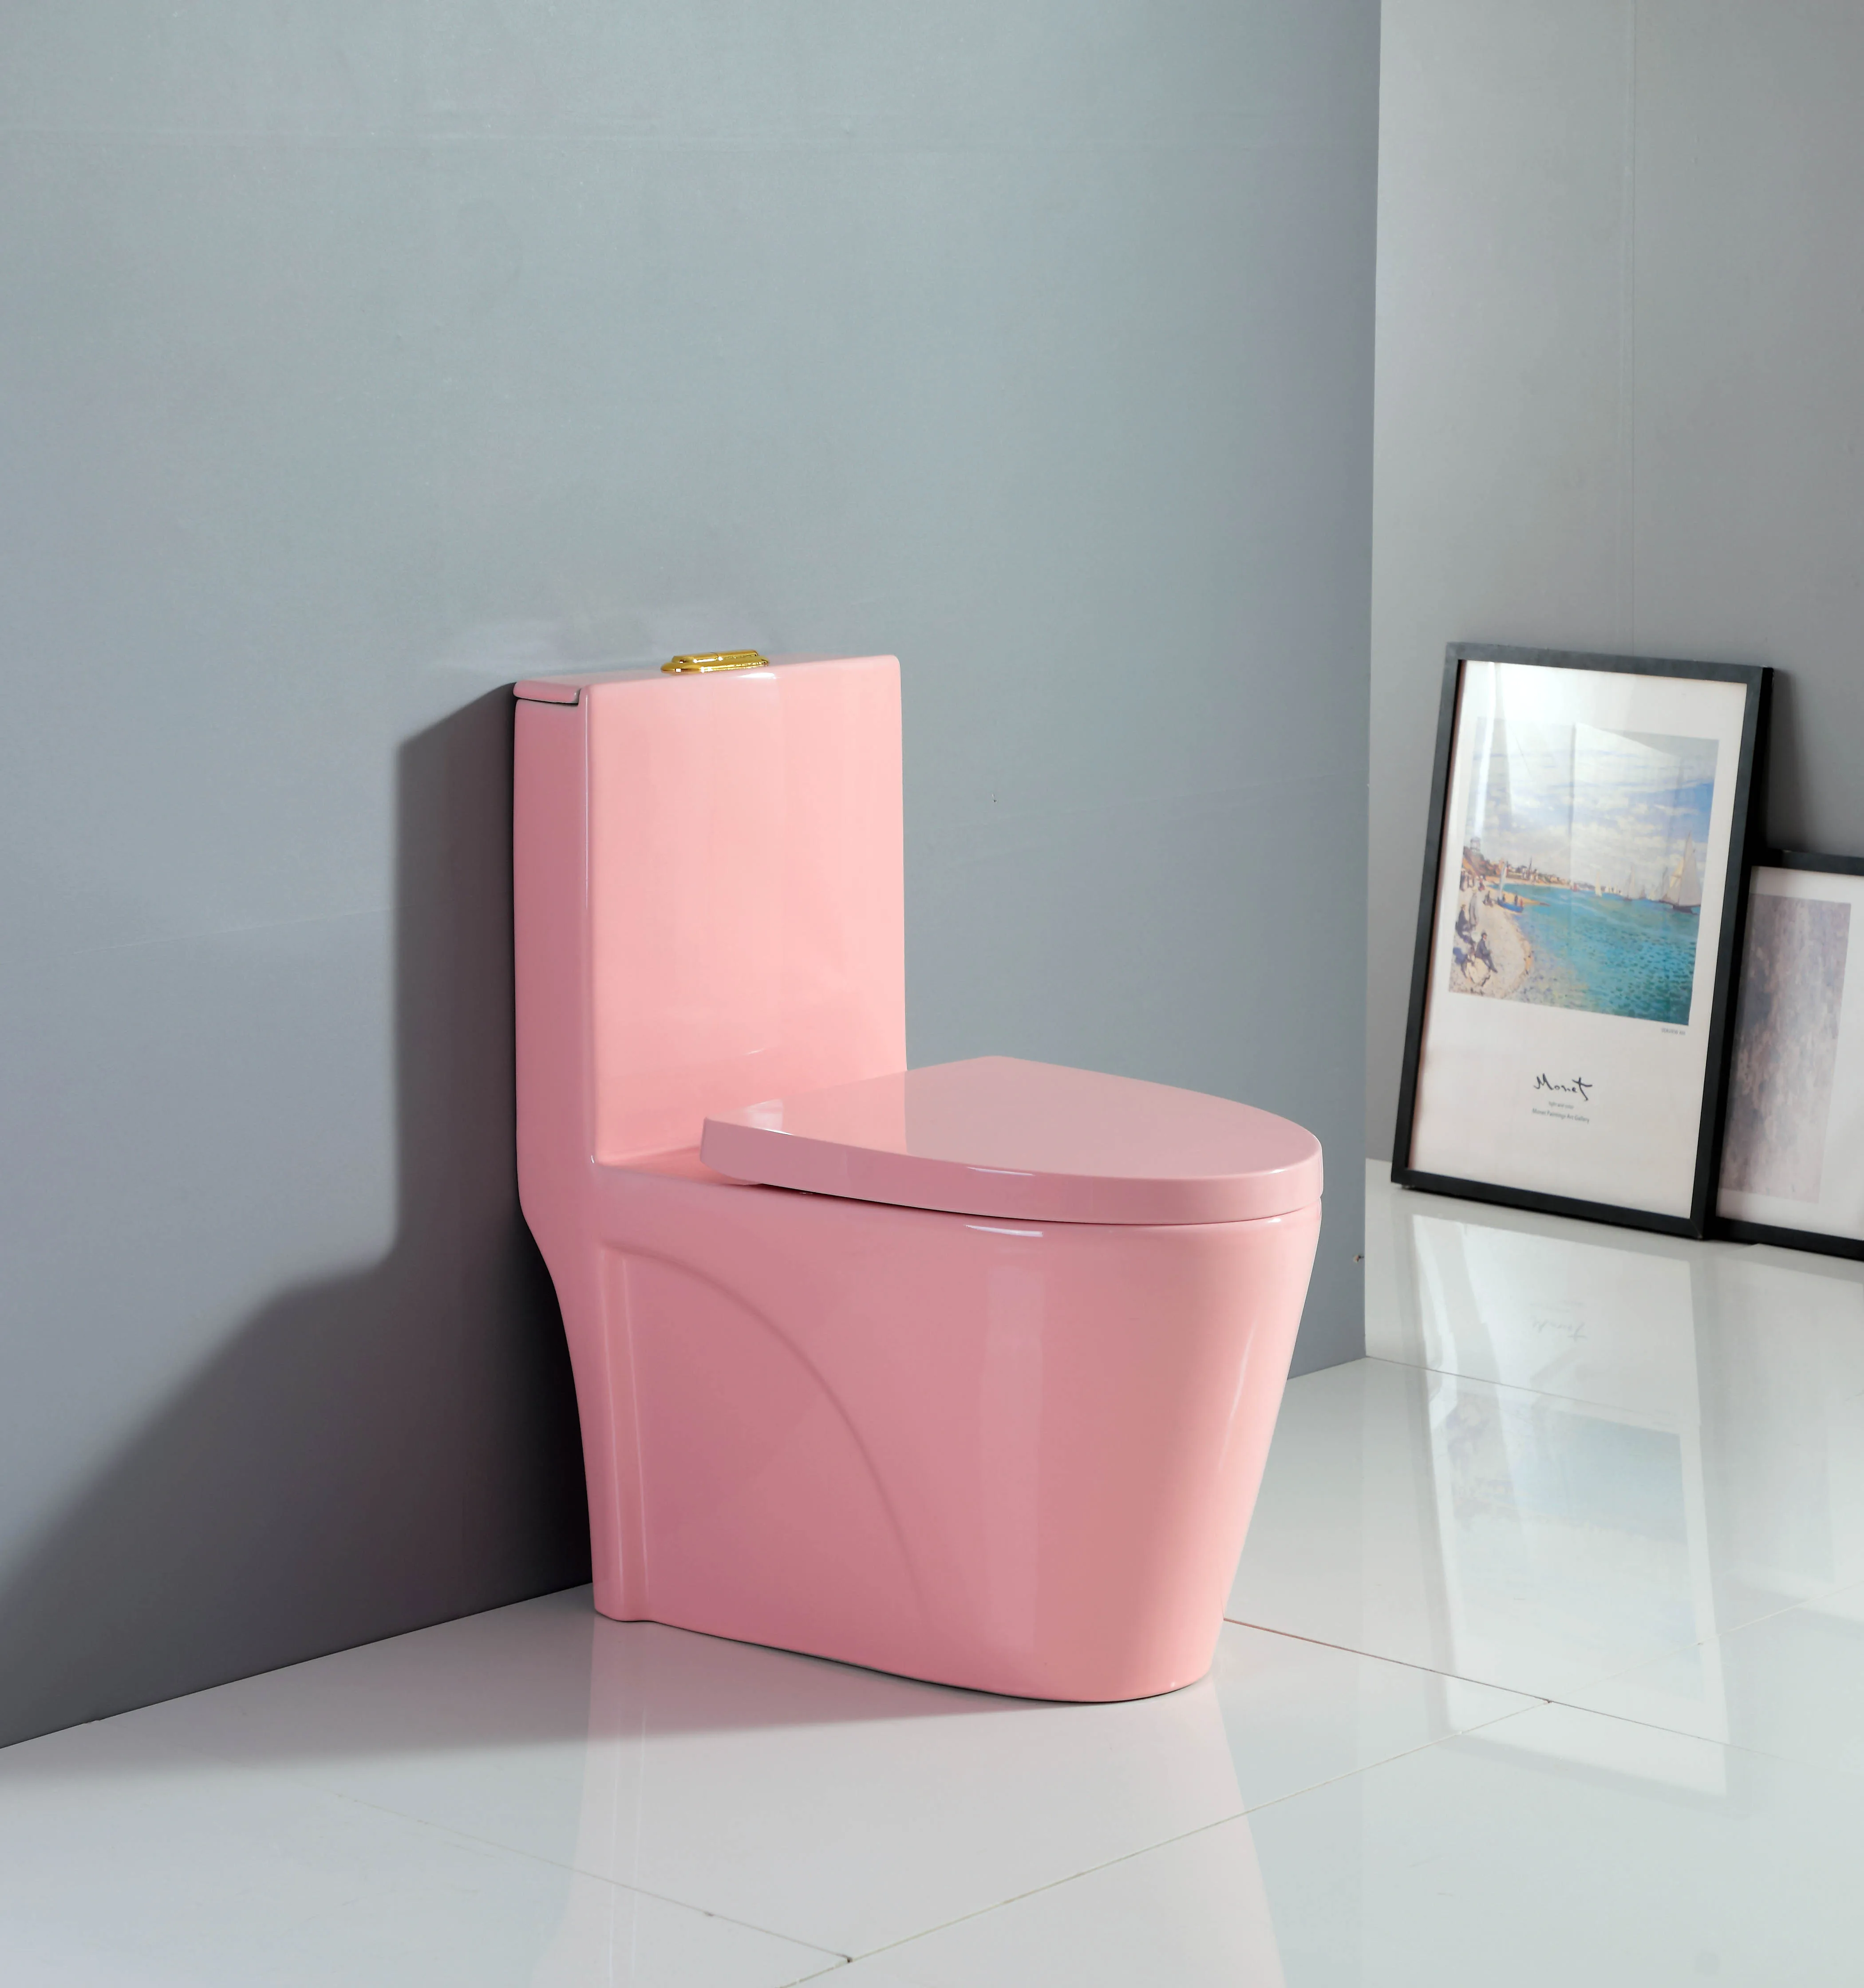 Multi Colored Bathroom Wc Ceramic One Piece Red Color Toilet Set With ...